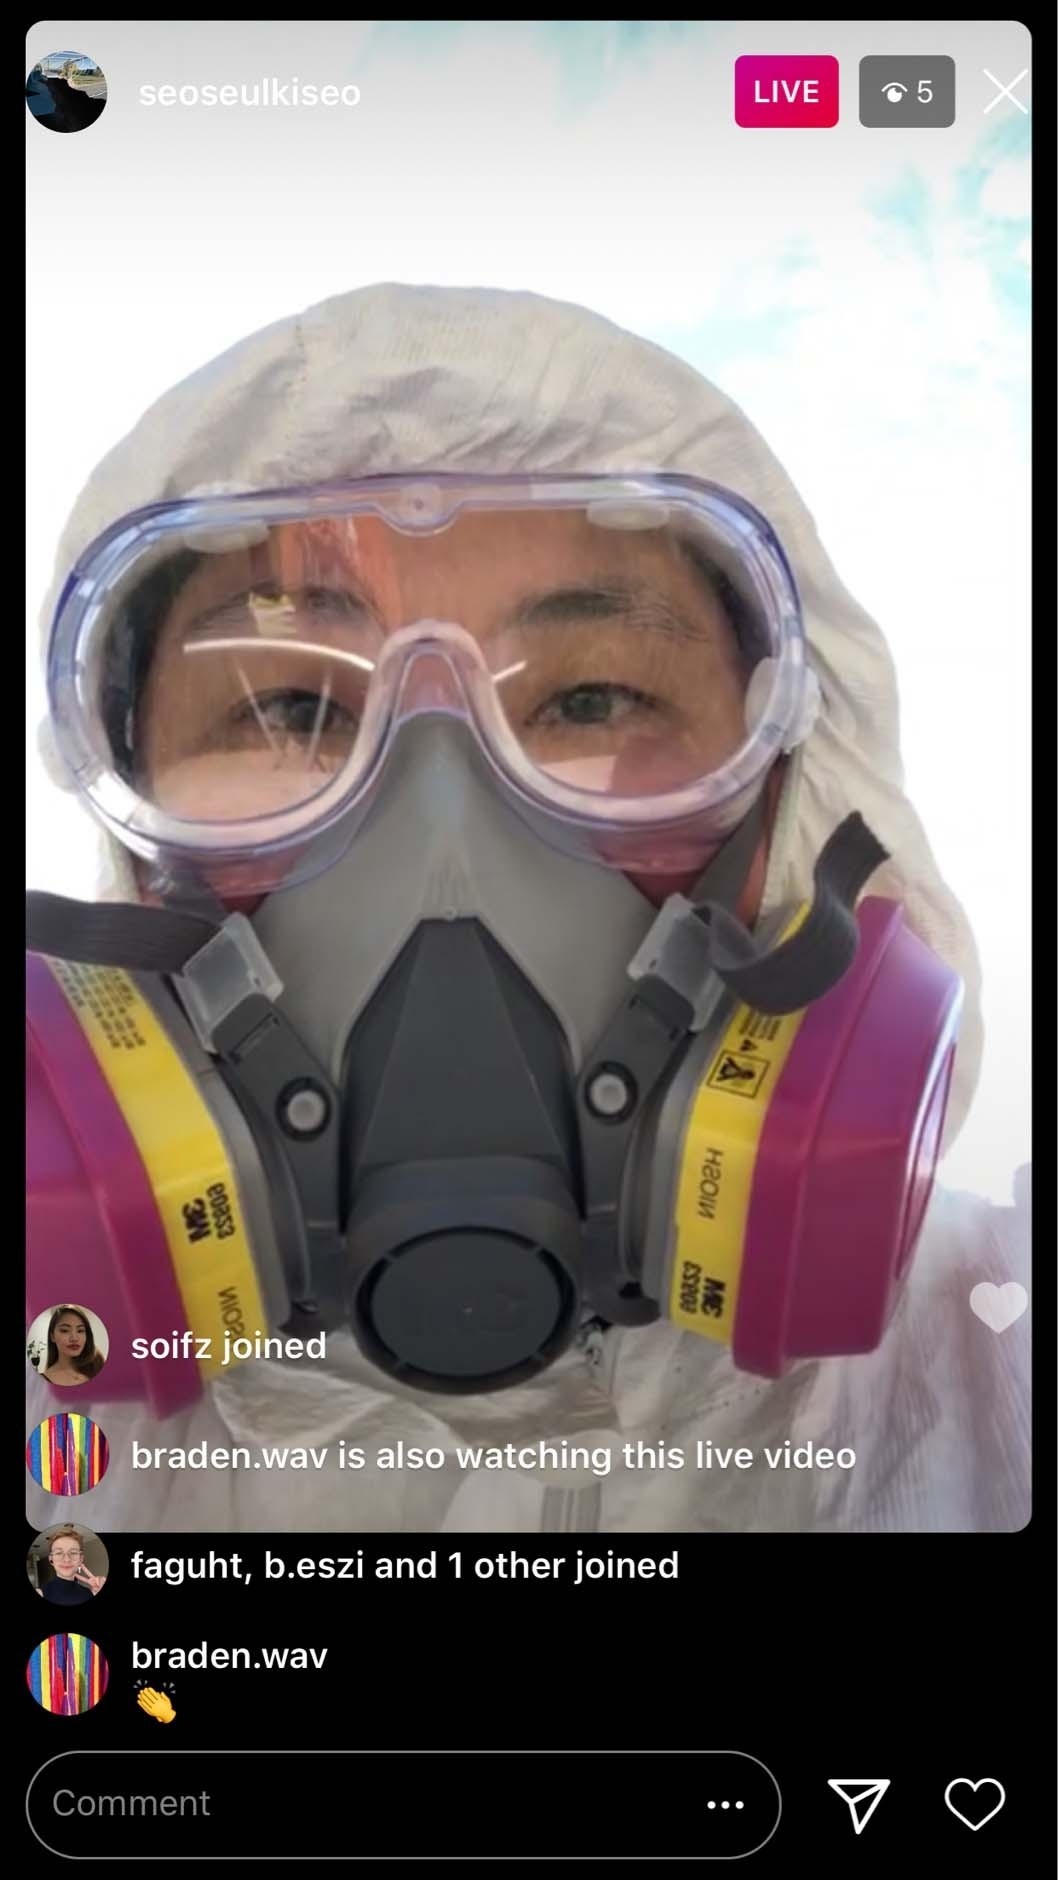 An instagram live screenshot view with Seulki looking at the camera in full Personal Protective Equipment 